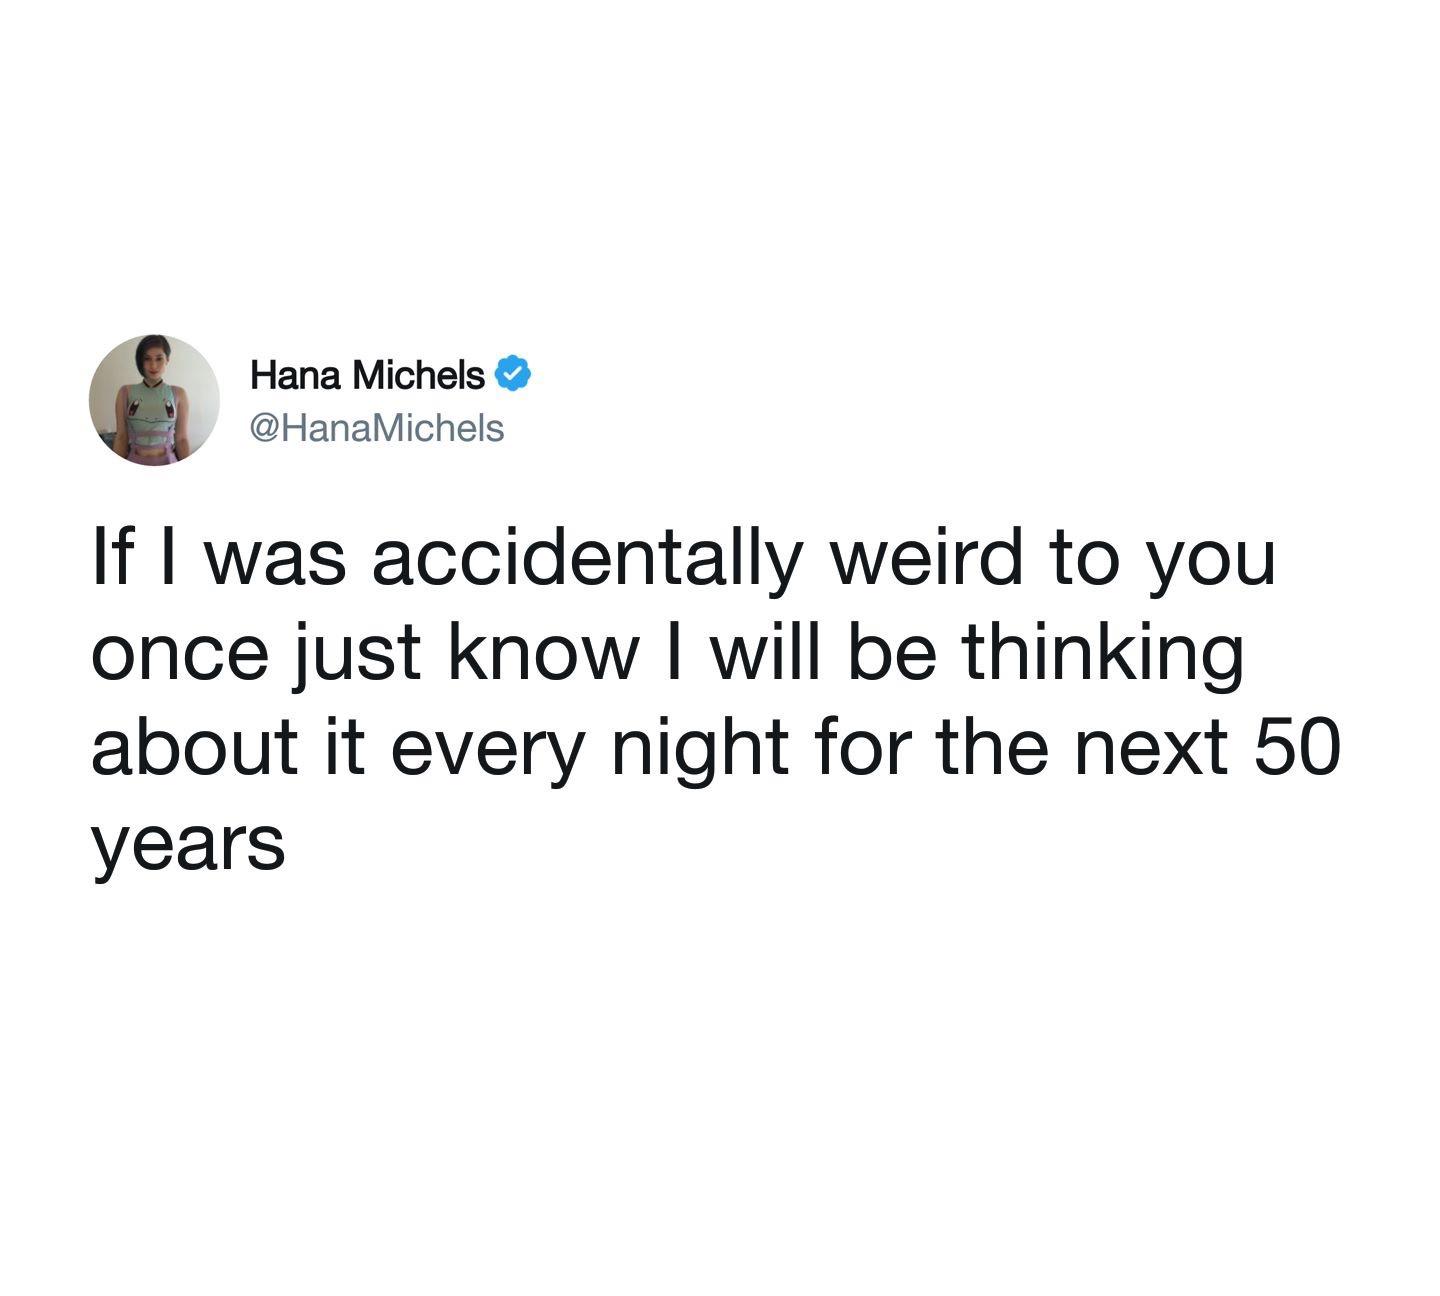 funny memes and pics - angle - Hana Michels If I was accidentally weird to you once just know I will be thinking about it every night for the next 50 years